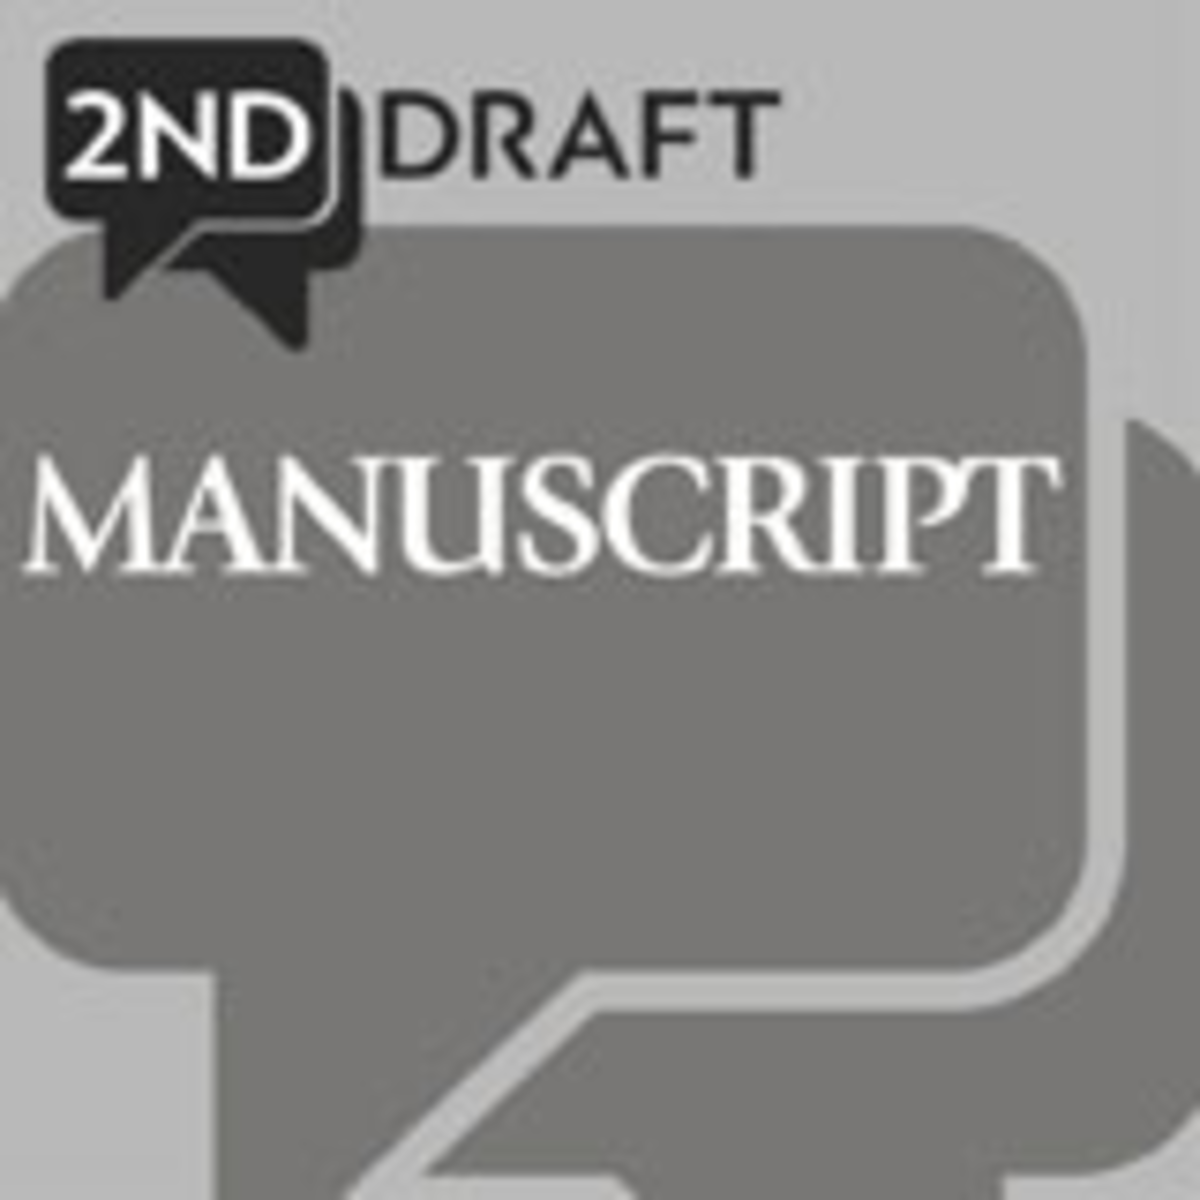 Ensure your manuscript skips the slush pile and lands on the desk of an acquisitions editor or literary agent and — get a 2nd Draft critique! When you send in at least 50 consecutive pages of your manuscript for review, you'll get an overall evaluation on your manuscript's strengths and weaknesses.